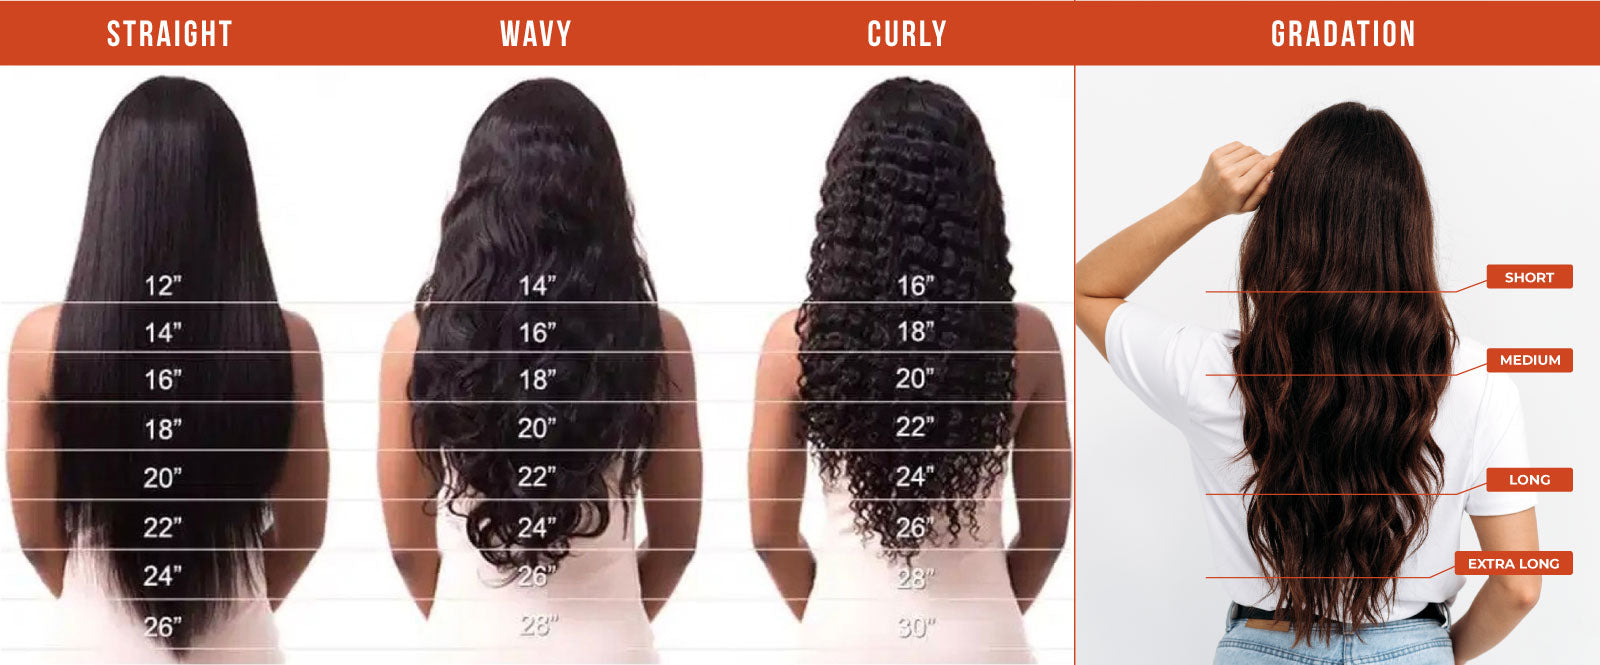 choose the right length!